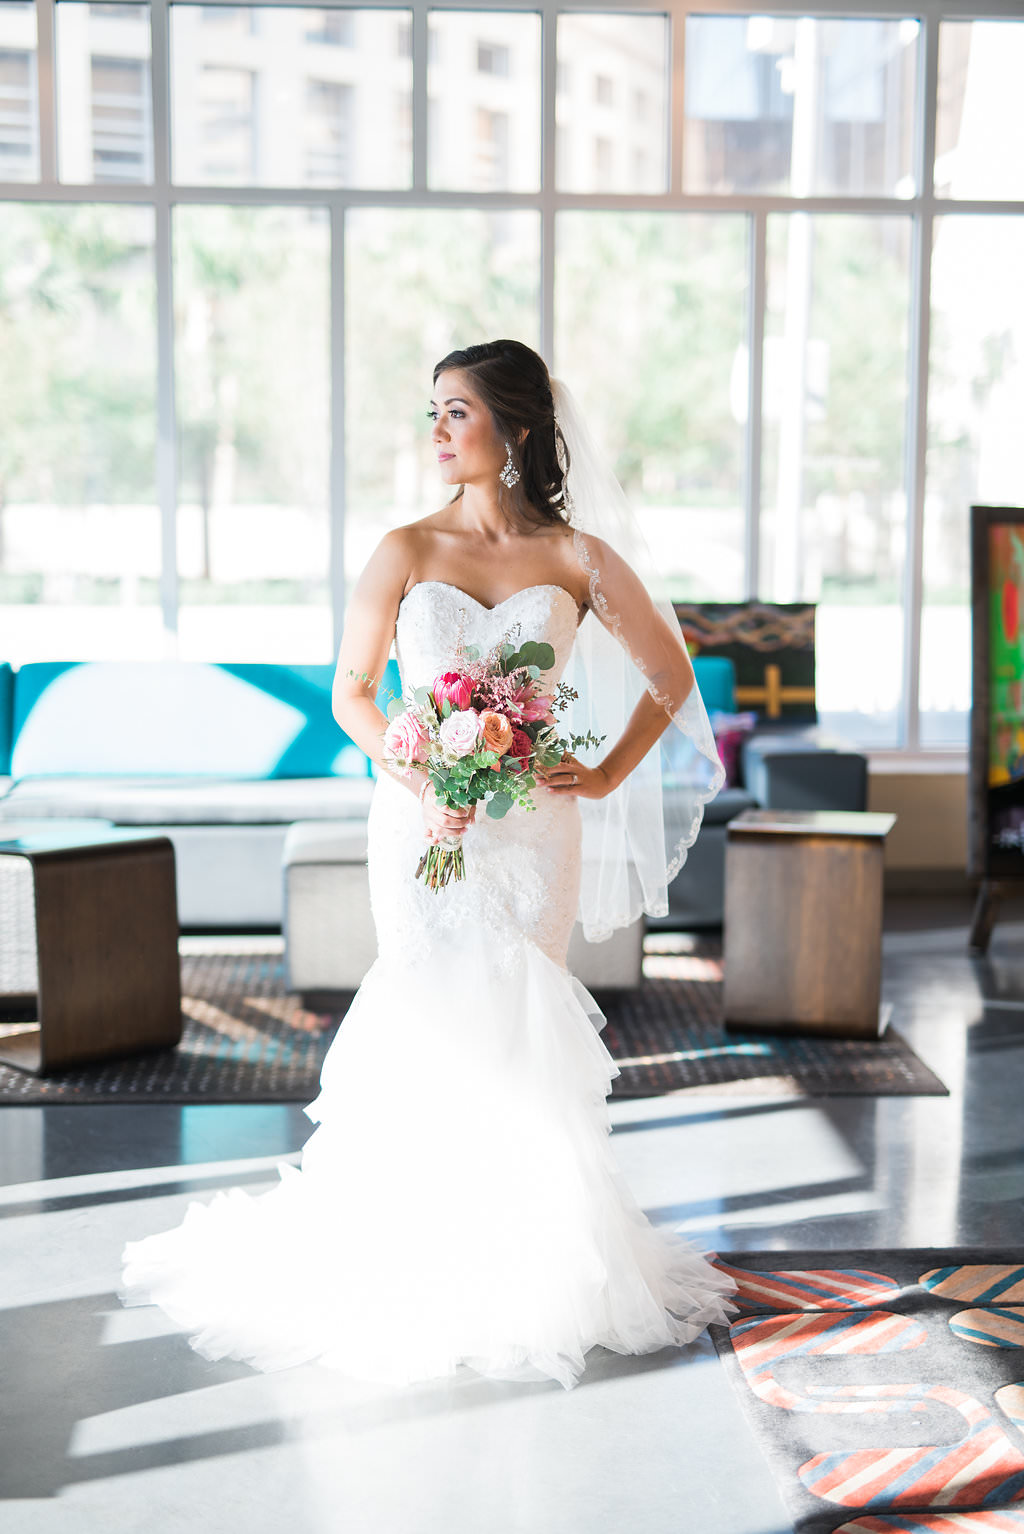 Indoor Bridal Portrait in Princess Strapless Mermaid Enzoani Wedding Dress with Pink, BLush and White Floral with Greenery Bouquet | Tampa Wedding Photographer Kera Photography